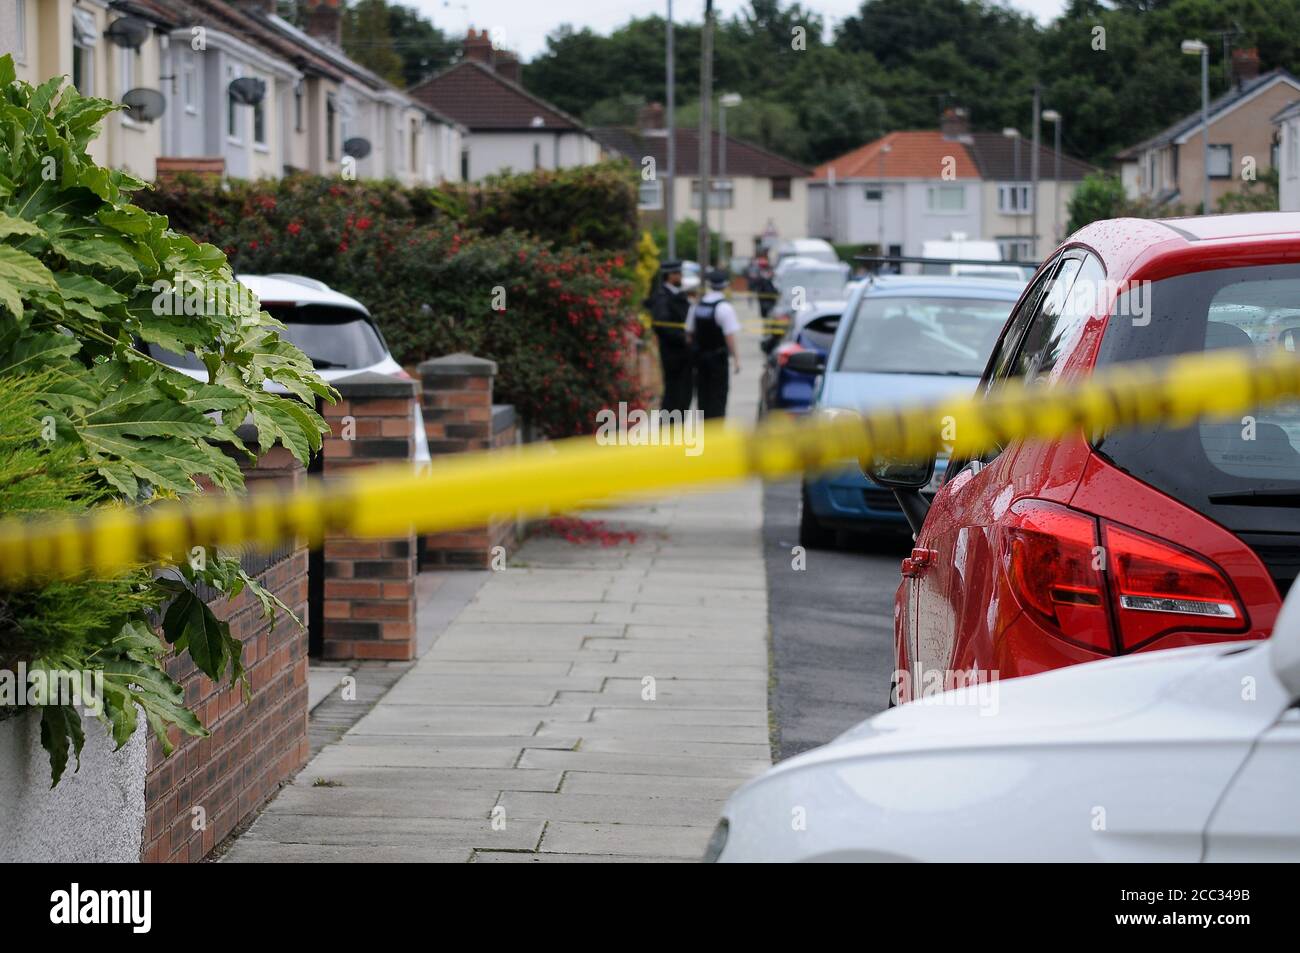 Merseyside Police at a suspected crime scene Stock Photo